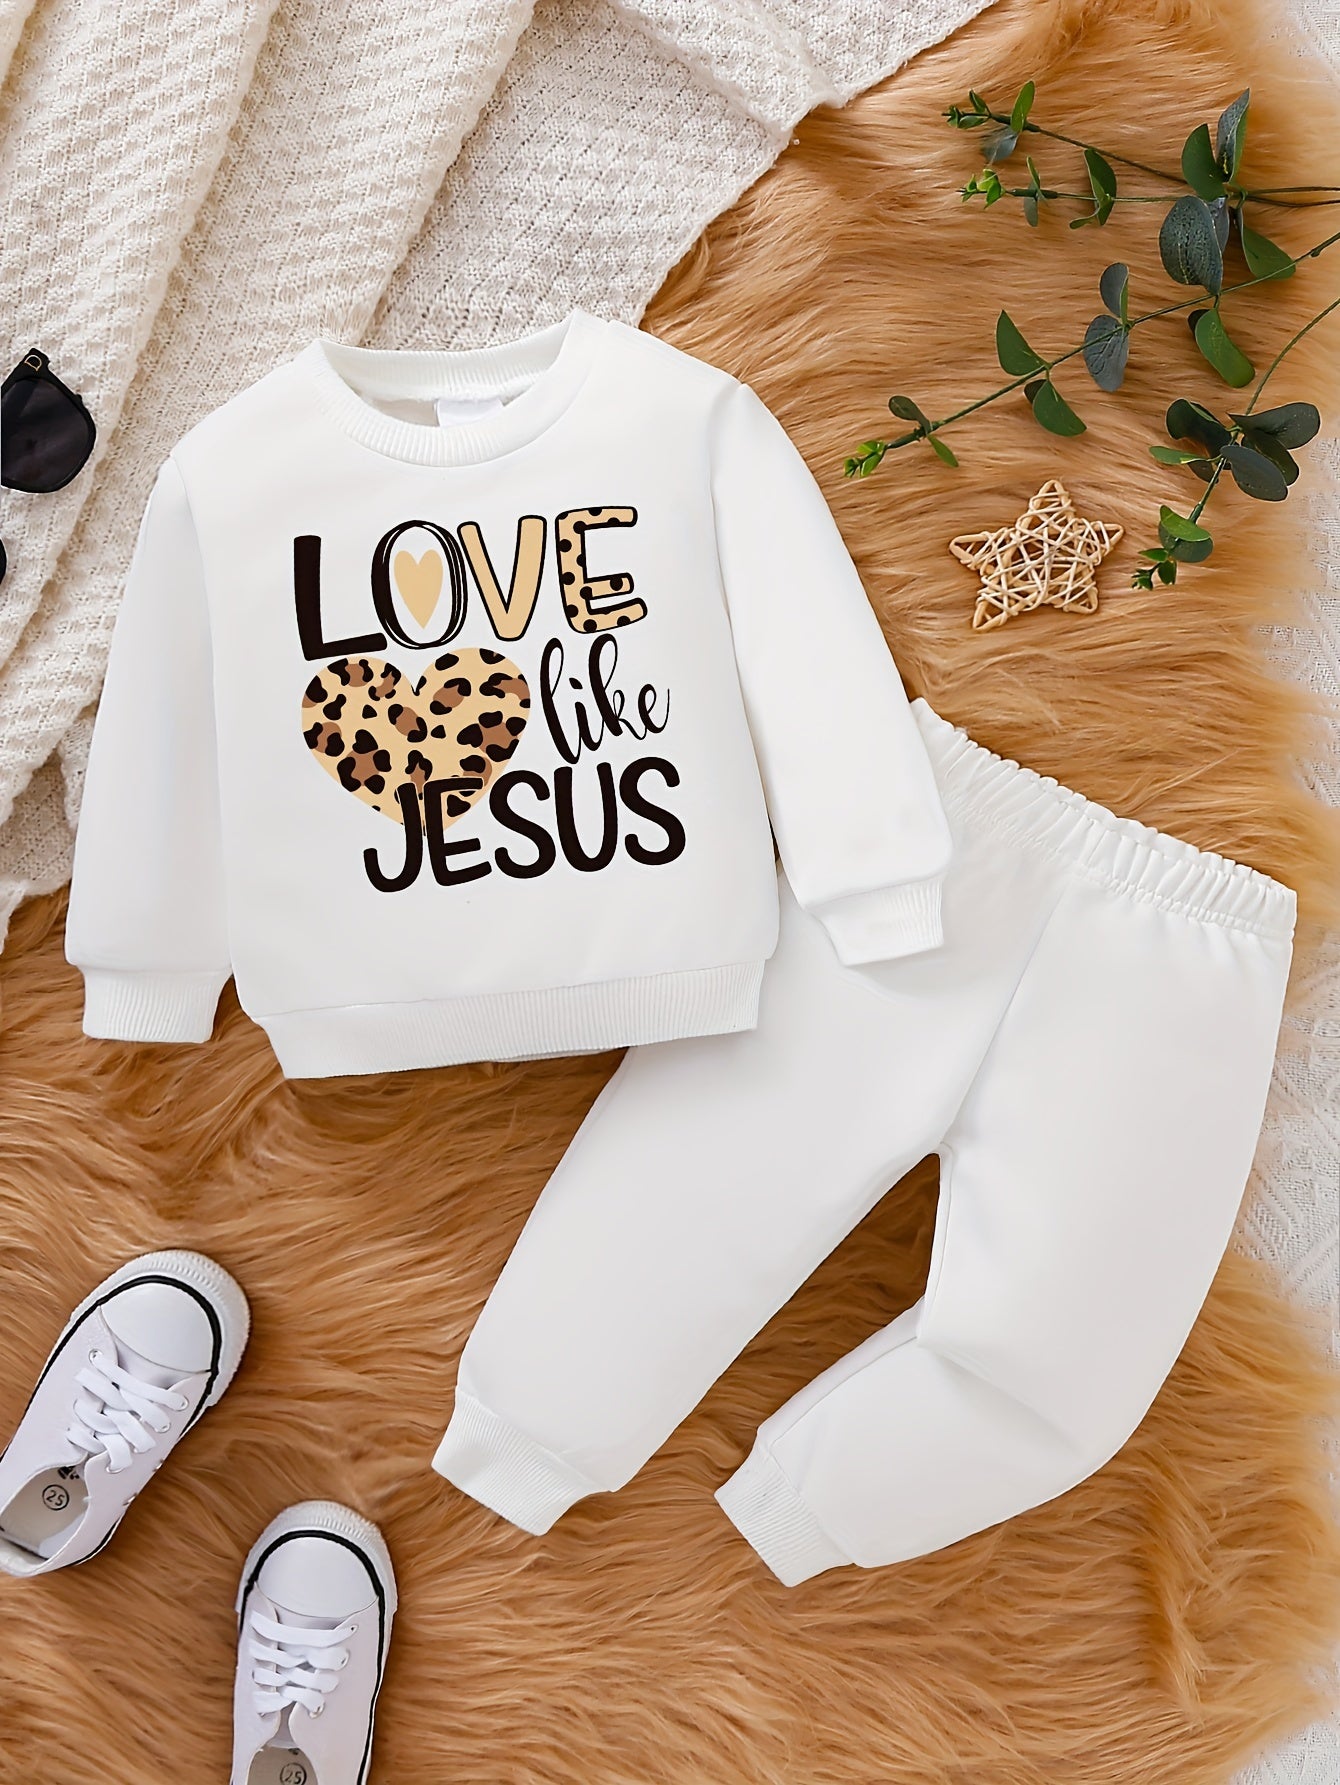 LOVE LIKE JESUS Toddler Christian Casual Outfit claimedbygoddesigns